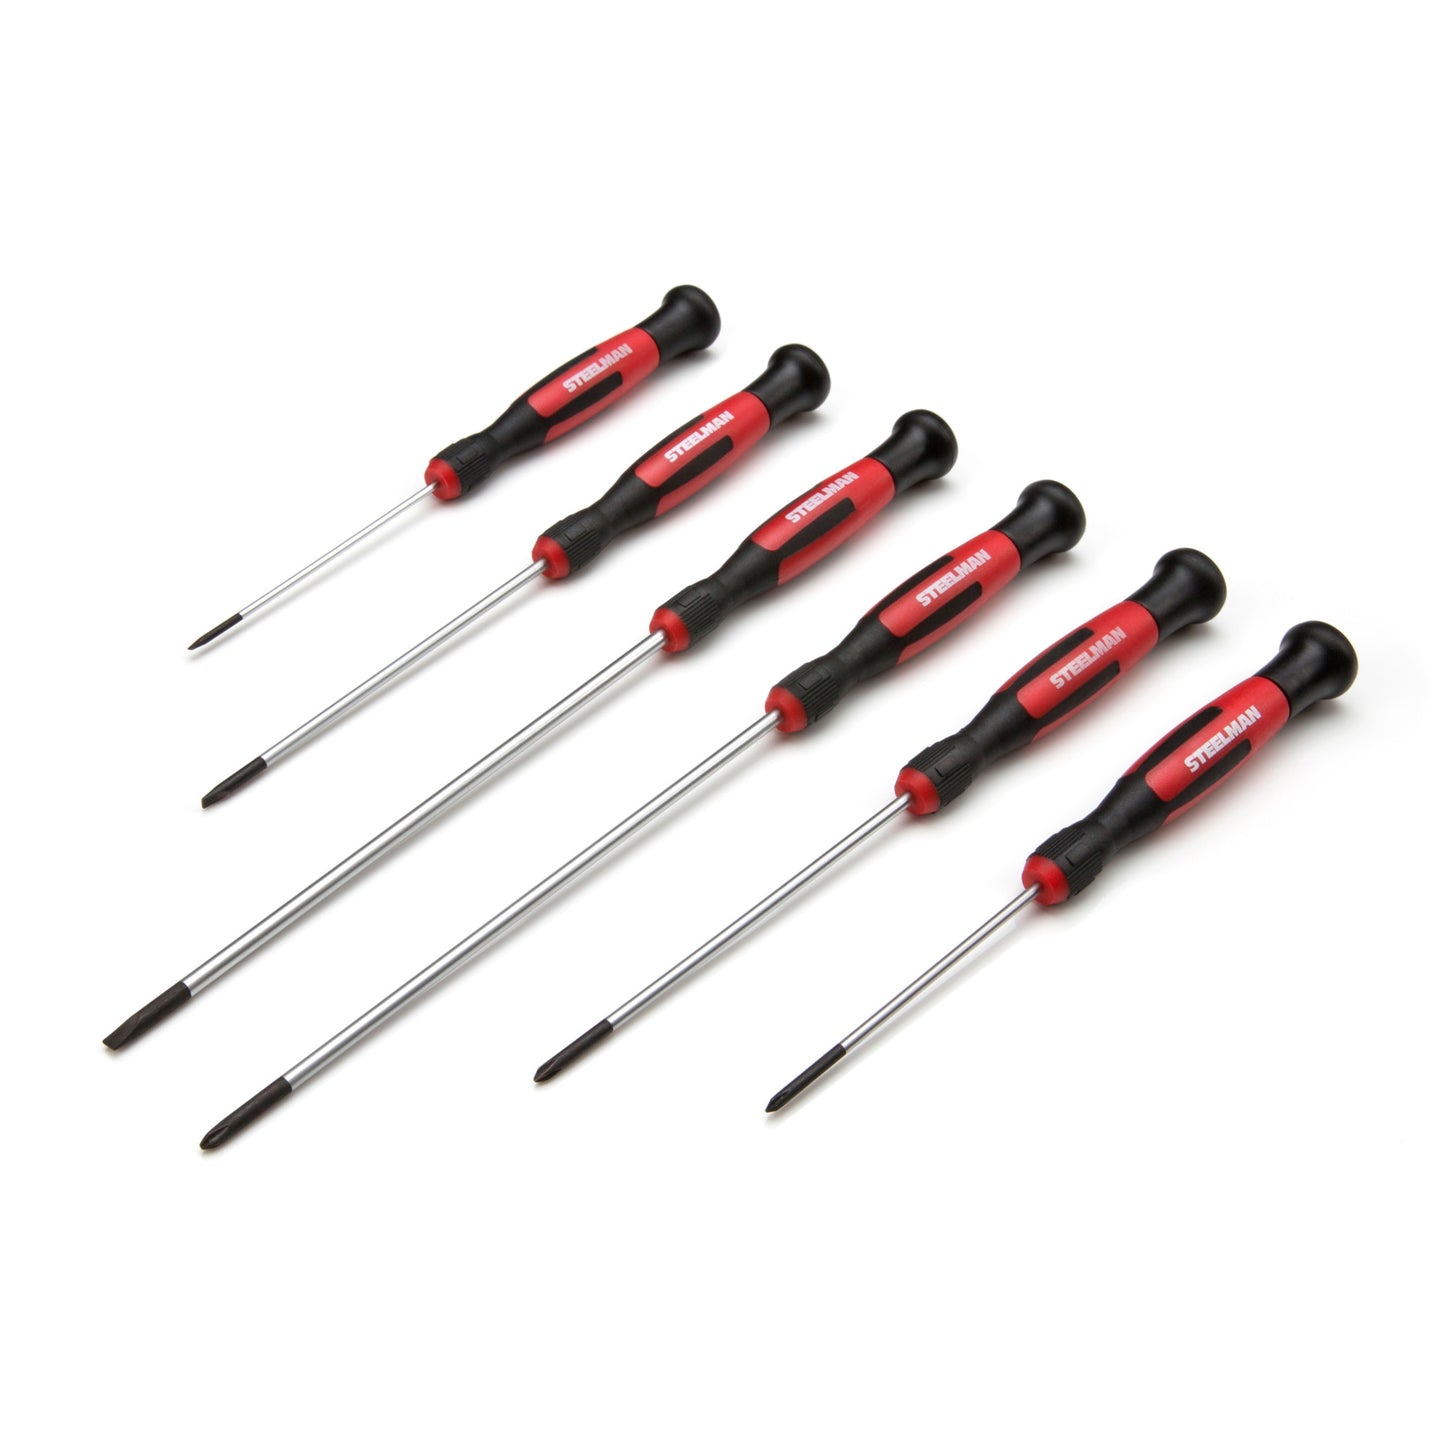 Long Reach Precision Phillips and Slotted Screwdriver Set, 6-piece